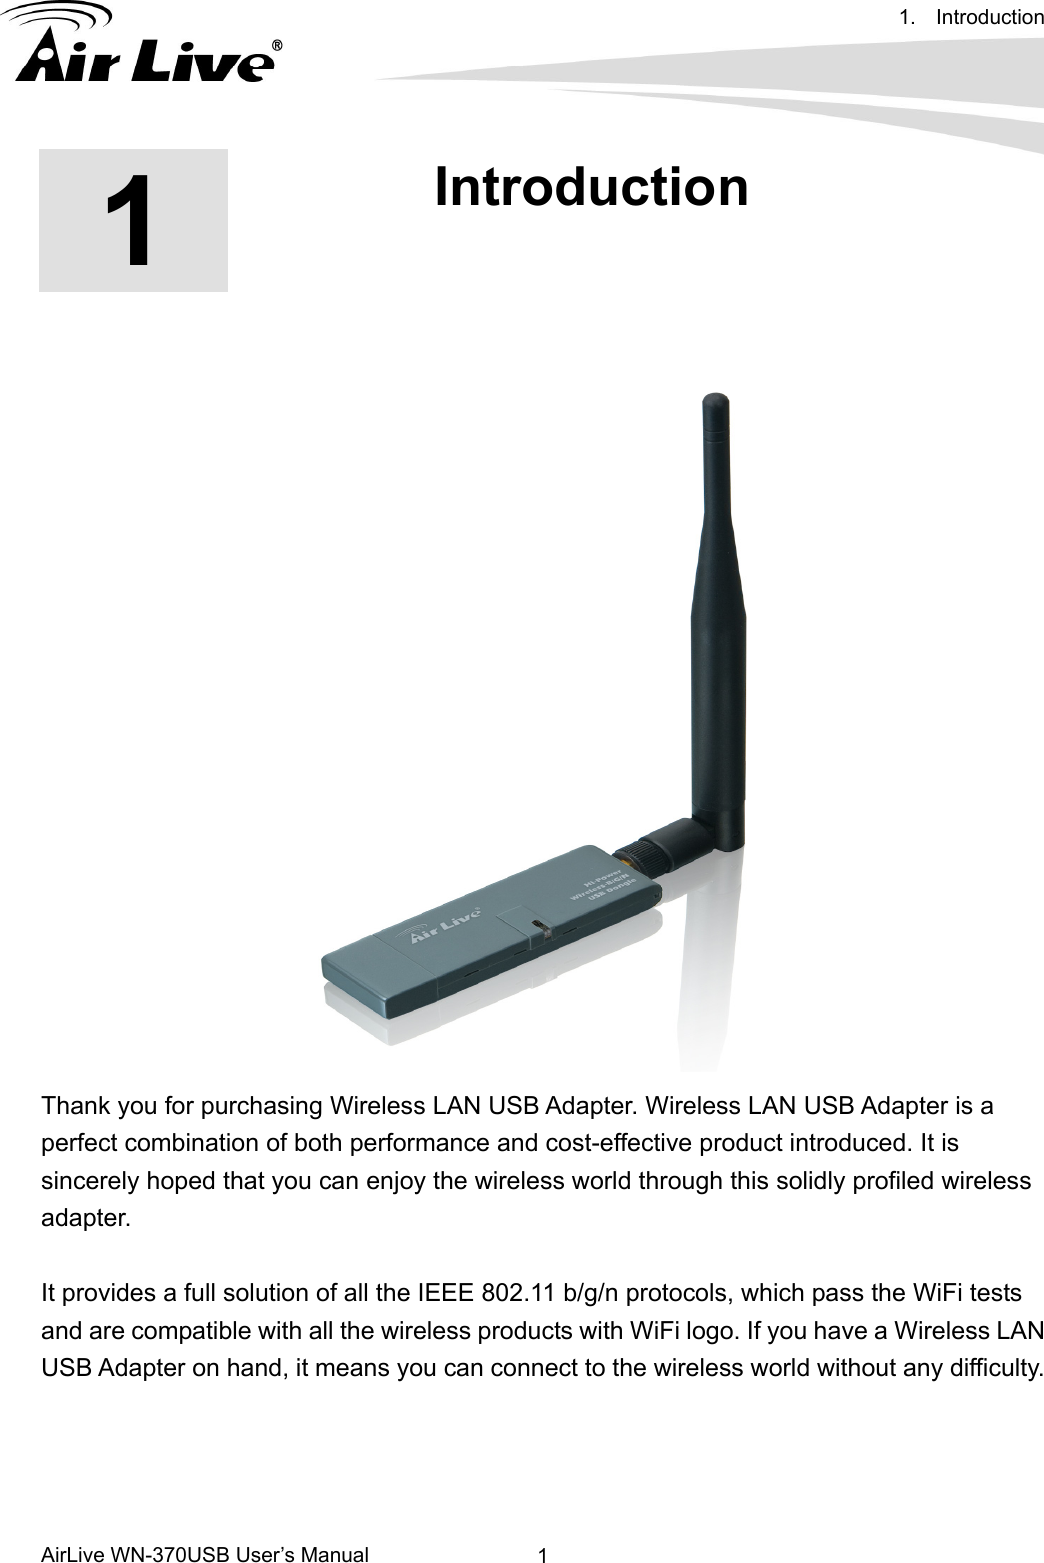 1. Introduction      AirLive WN-370USB User’s Manual  1     1  1. Introduction  Thank you for purchasing Wireless LAN USB Adapter. Wireless LAN USB Adapter is a perfect combination of both performance and cost-effective product introduced. It is sincerely hoped that you can enjoy the wireless world through this solidly profiled wireless adapter.  It provides a full solution of all the IEEE 802.11 b/g/n protocols, which pass the WiFi tests and are compatible with all the wireless products with WiFi logo. If you have a Wireless LAN USB Adapter on hand, it means you can connect to the wireless world without any difficulty.     